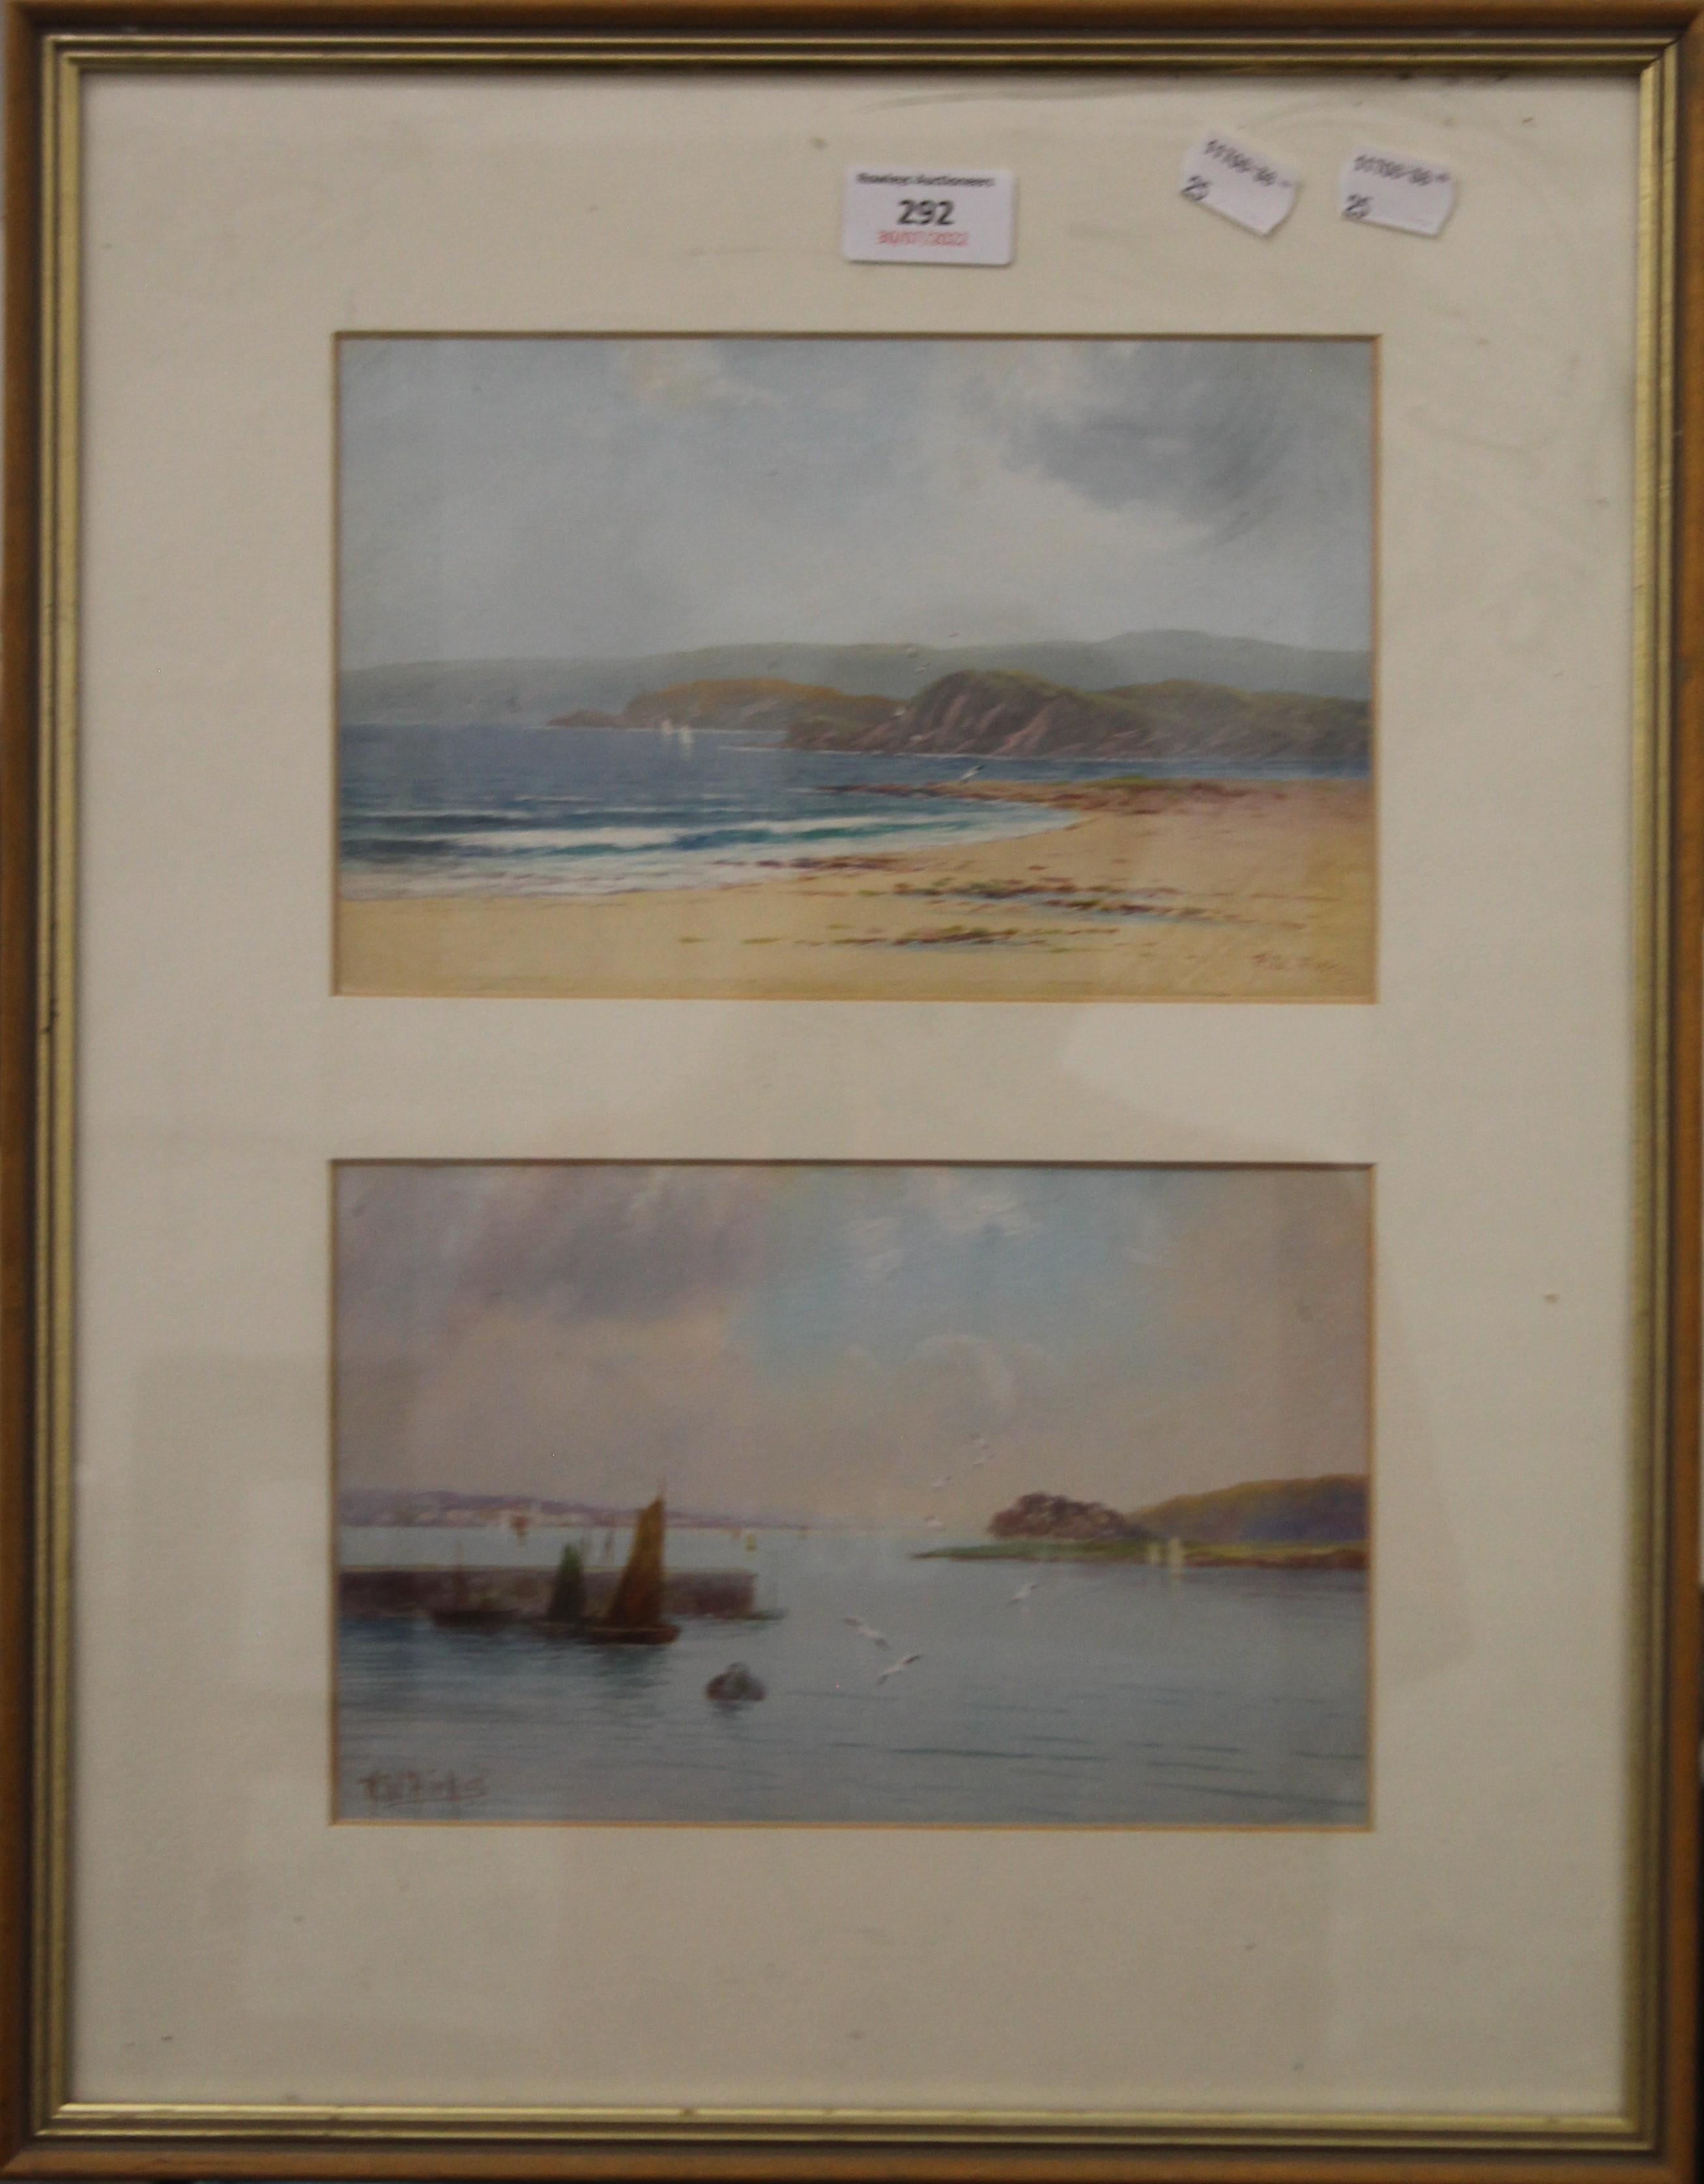 Devon Coast and River Exe, watercolours, signed H W HICKS, housed in a common frame, glazed. - Image 3 of 4